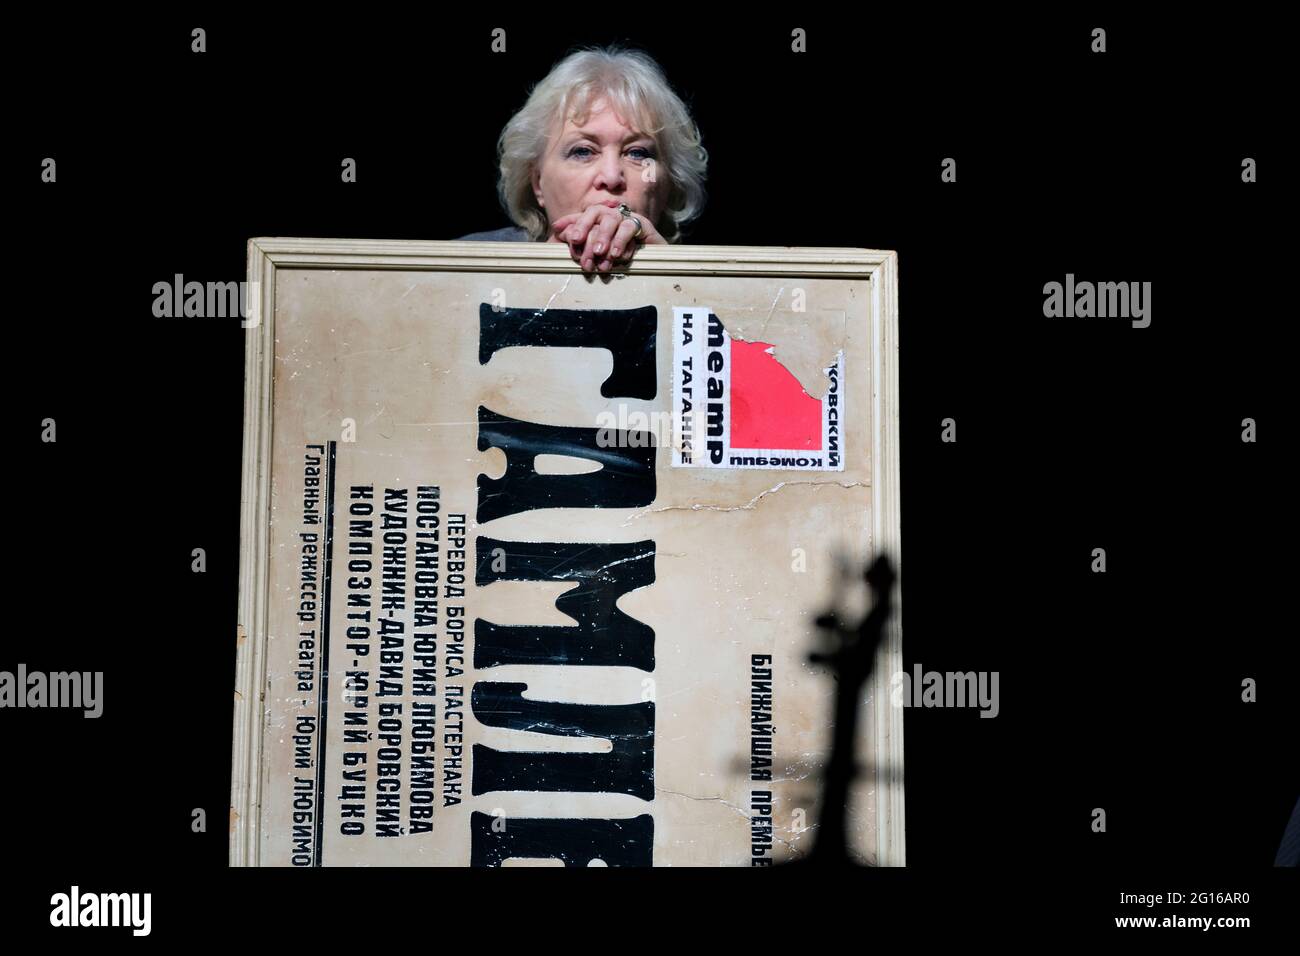 Moscow, Russia. 22nd of April, 2014 The honoured artist of Russia Tatiana Sidorenko during the performance of the Taganka theatre 'Taganka front' to the 50th anniversary of the theater in Moscow, Russia. She holds an old banner of the famous play 'Hamlet' with the name of the performance and the theater logo Stock Photo